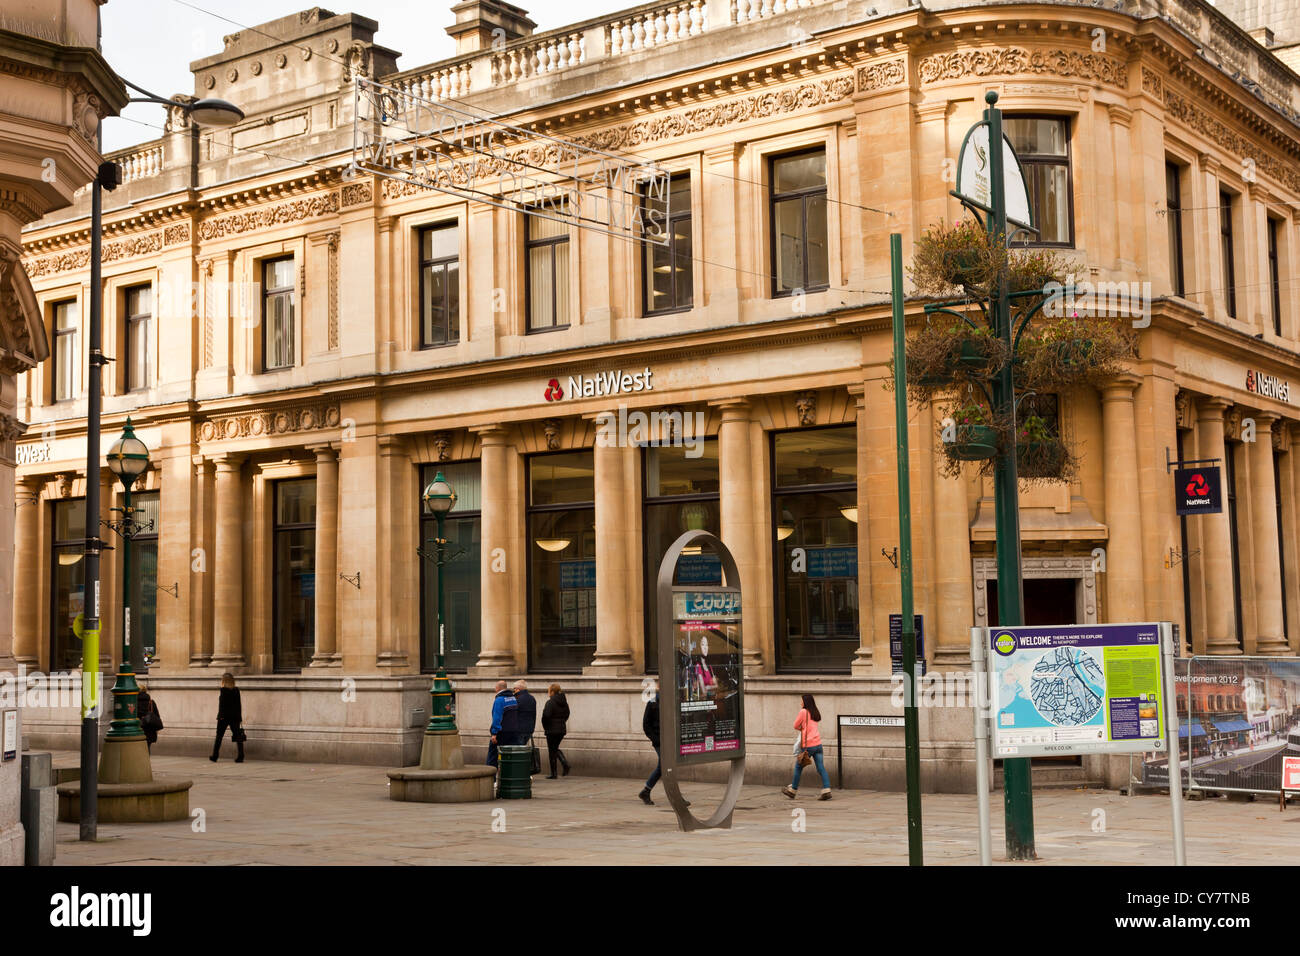 Natwest bank traditional city center branch, Newport, Wales, UK. Stock Photo